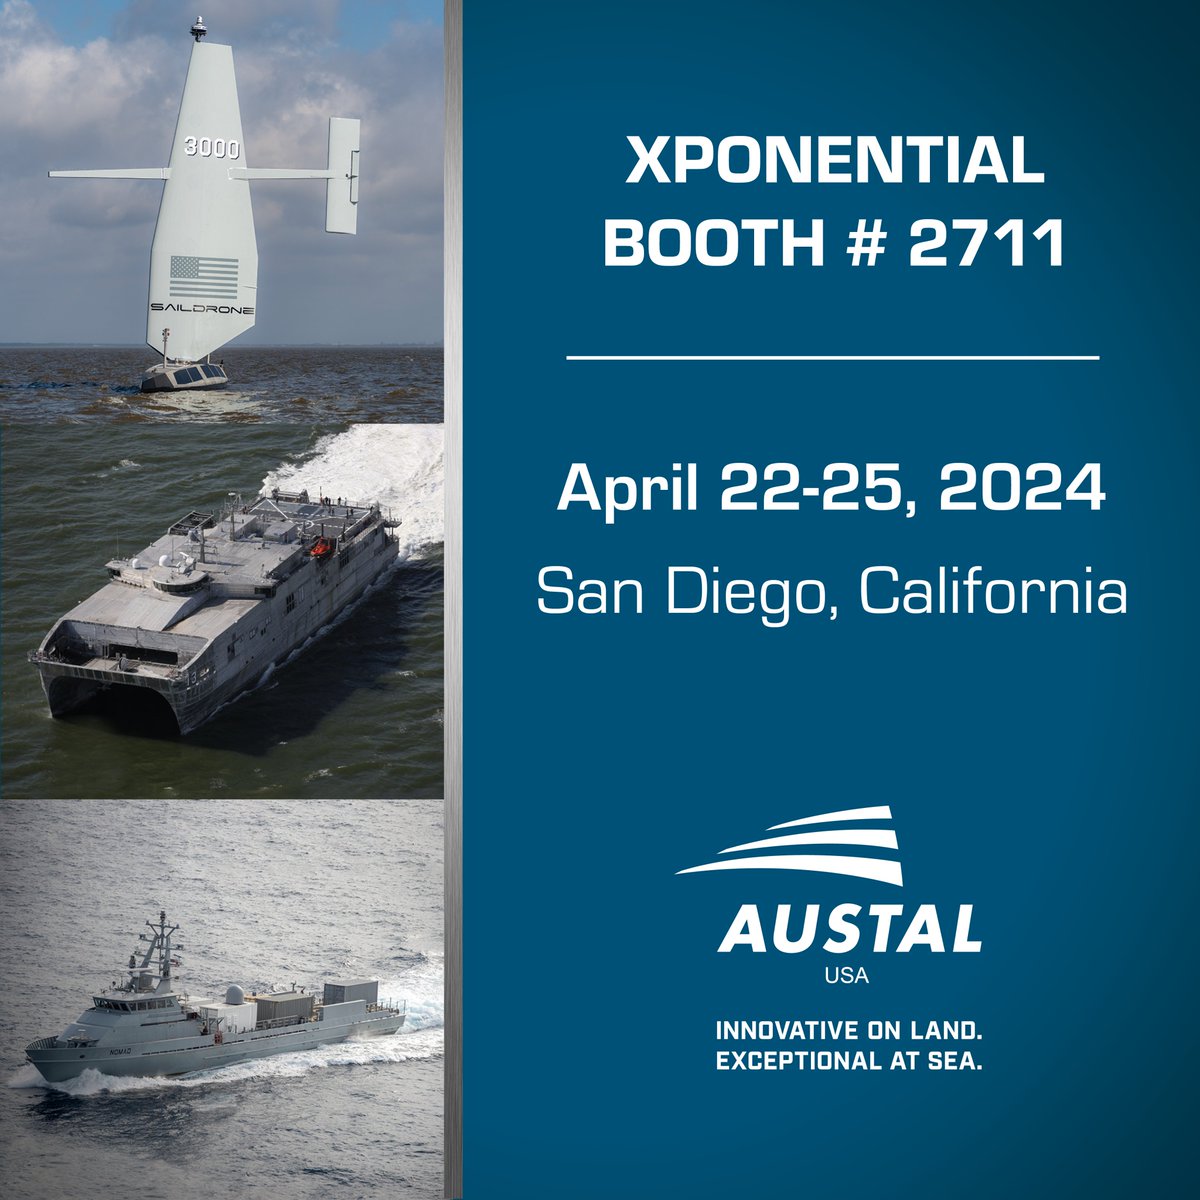 Visit Austal USA at @AUVSI XPONENTIAL 2024 to learn more about our autonomous surface vessel programs. Business development and engineering representatives are available to meet with you and discuss our innovative autonomous and unmanned solutions.